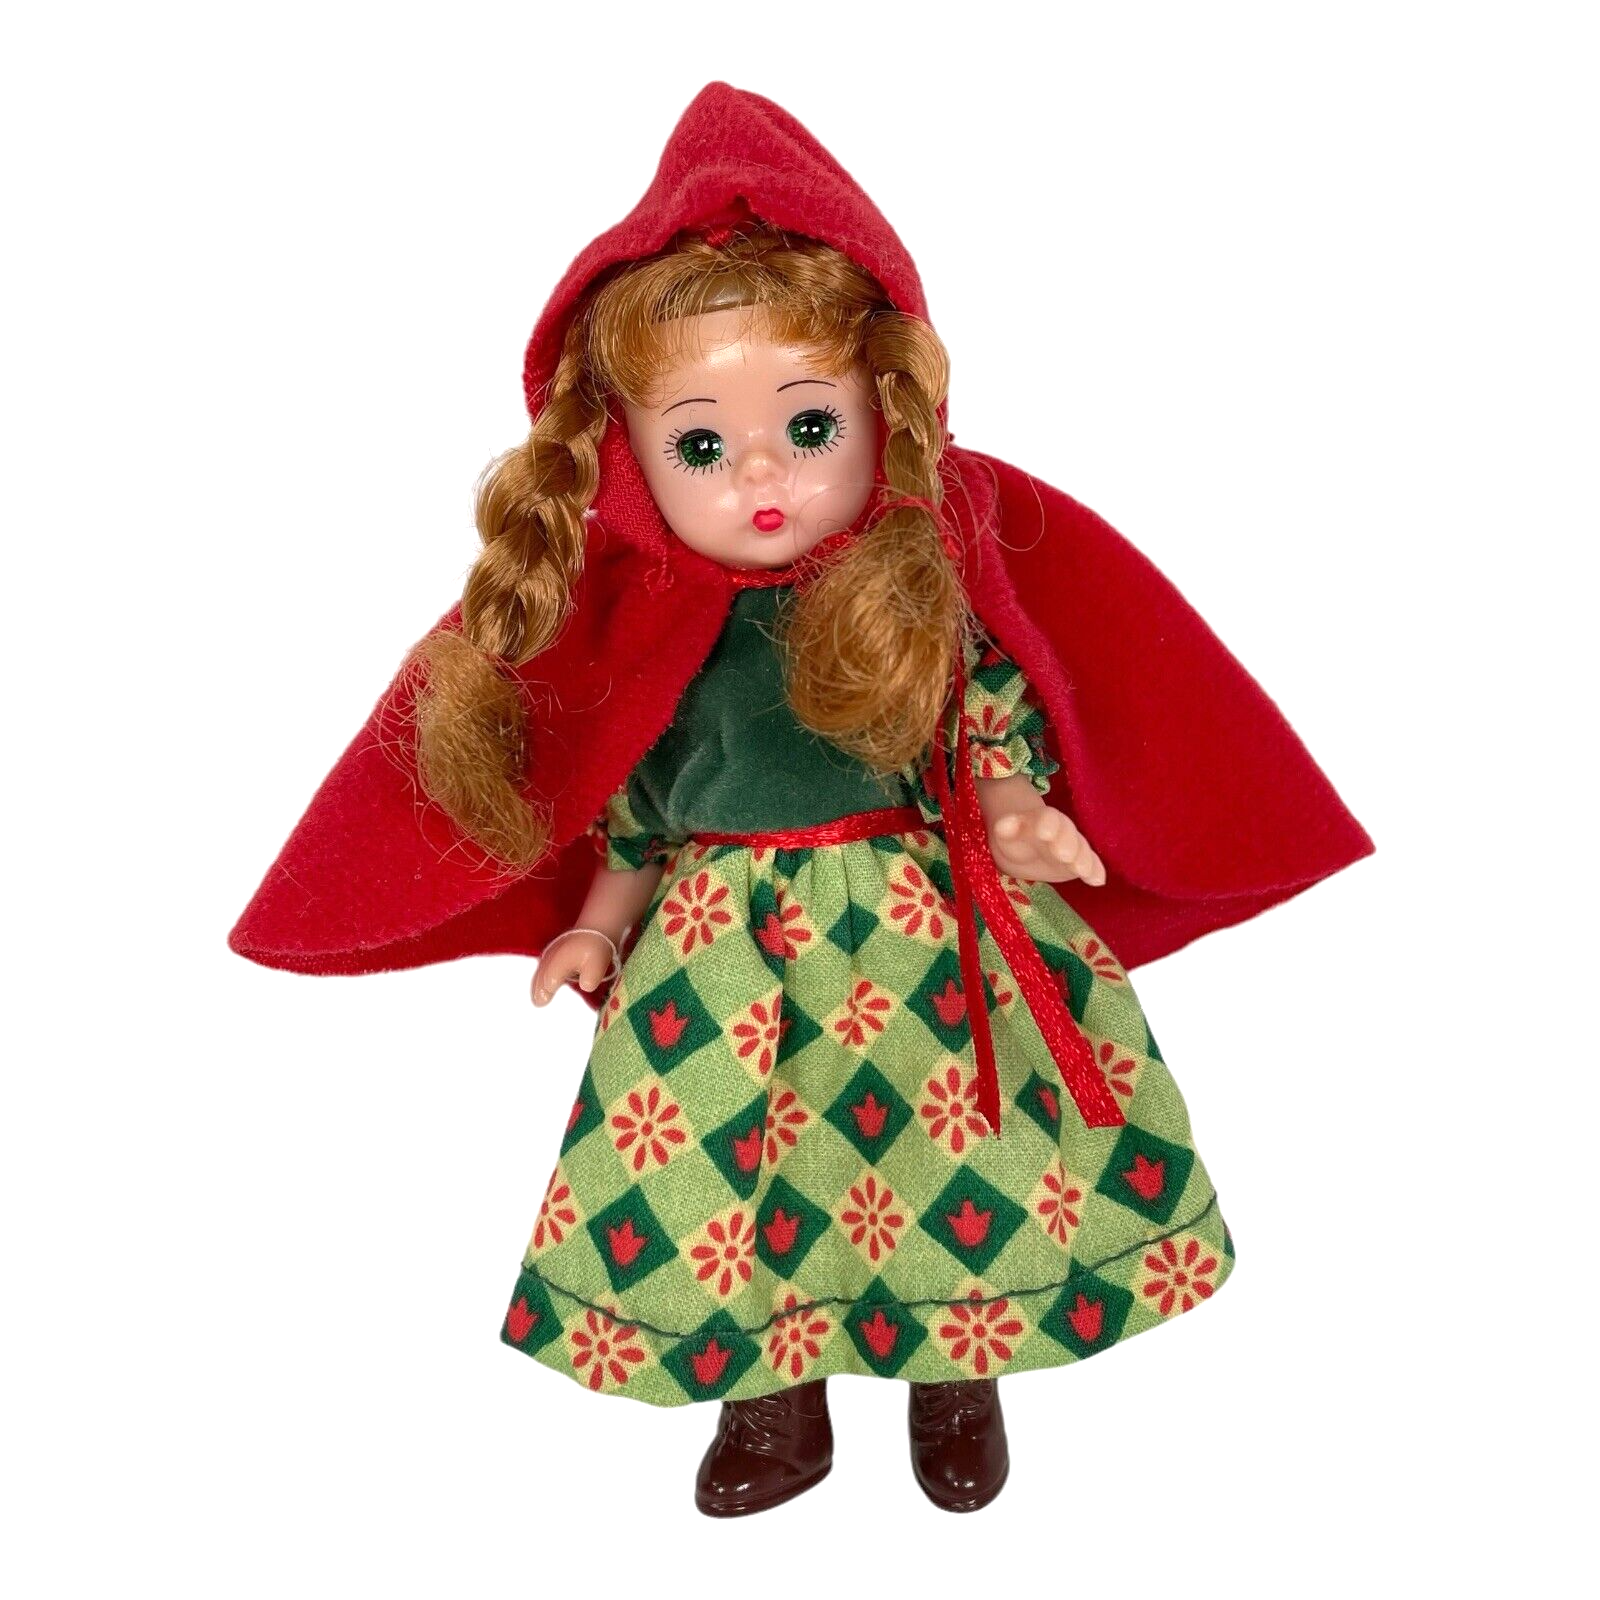 2002 Madam Alexander Little Red Riding Hood Toy 5.5" H Arms Legs Moveable - $18.70